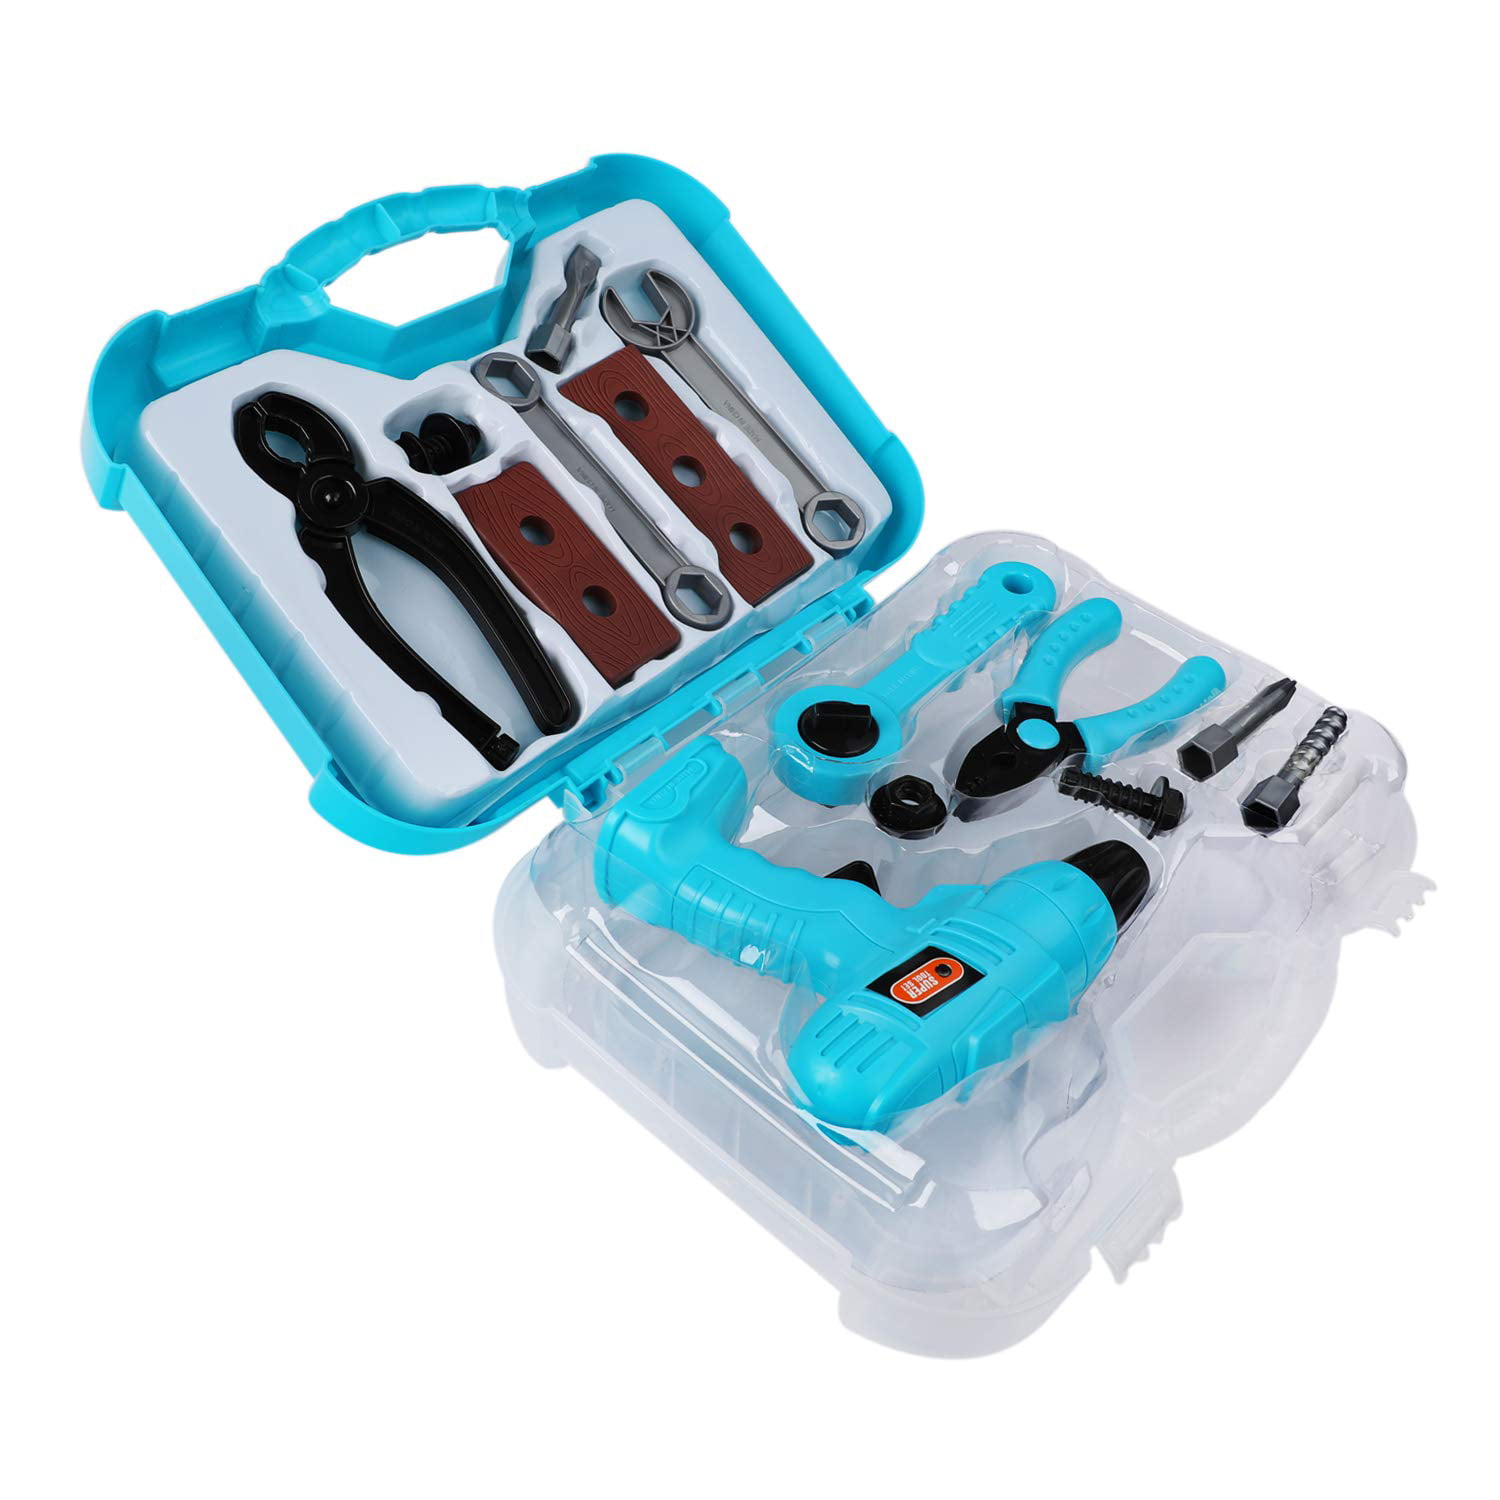 15 pc WORK TOOL CARRY ALONG TRAVEL CASE SET Pretend Play Toy Hammer Wrench Saw 